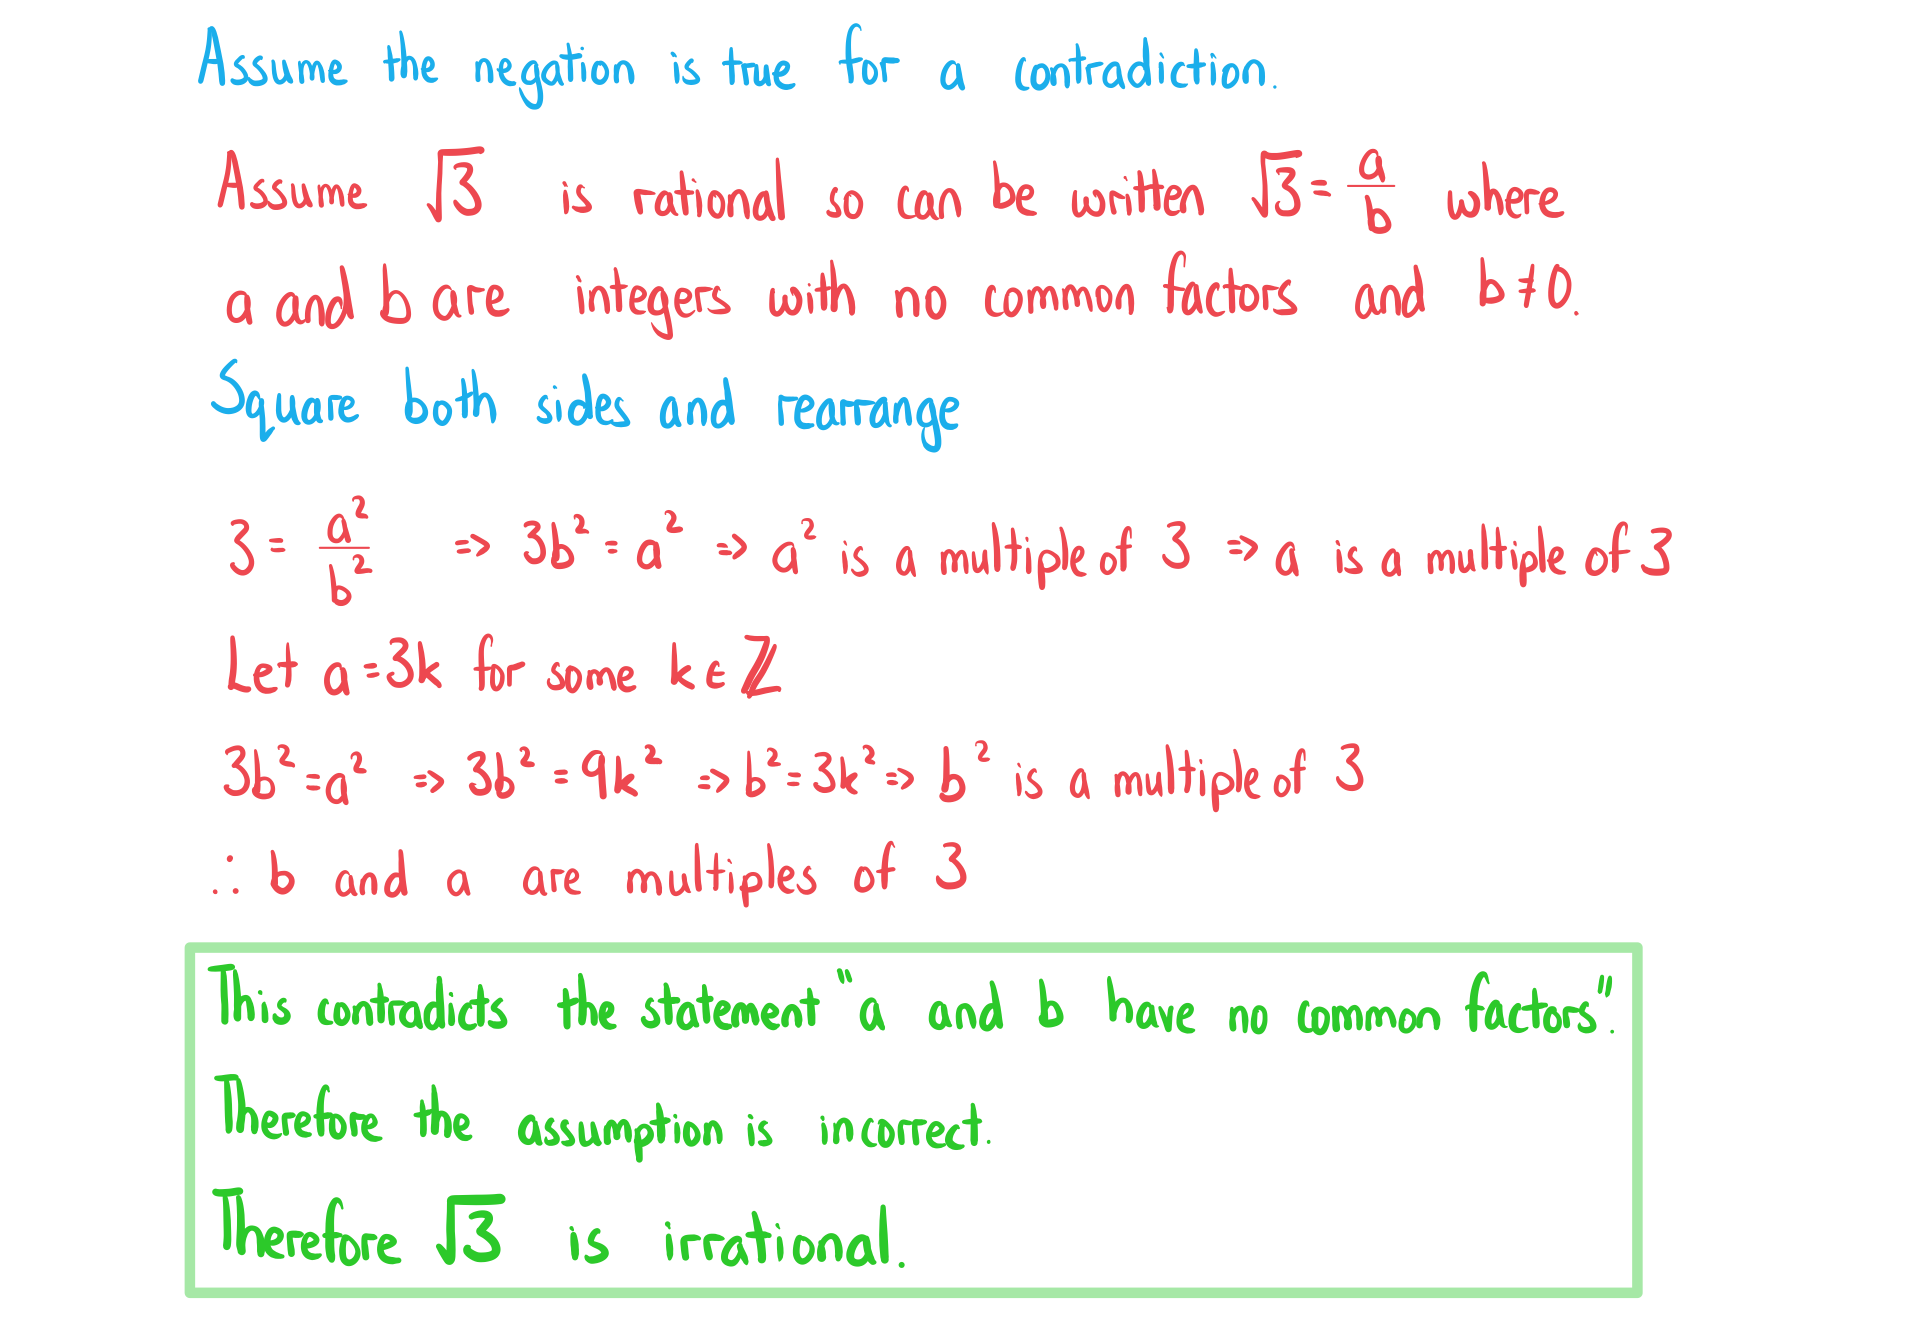 1-5-2-ib-aa-hl-proof-by-contradiction-b-we-solution